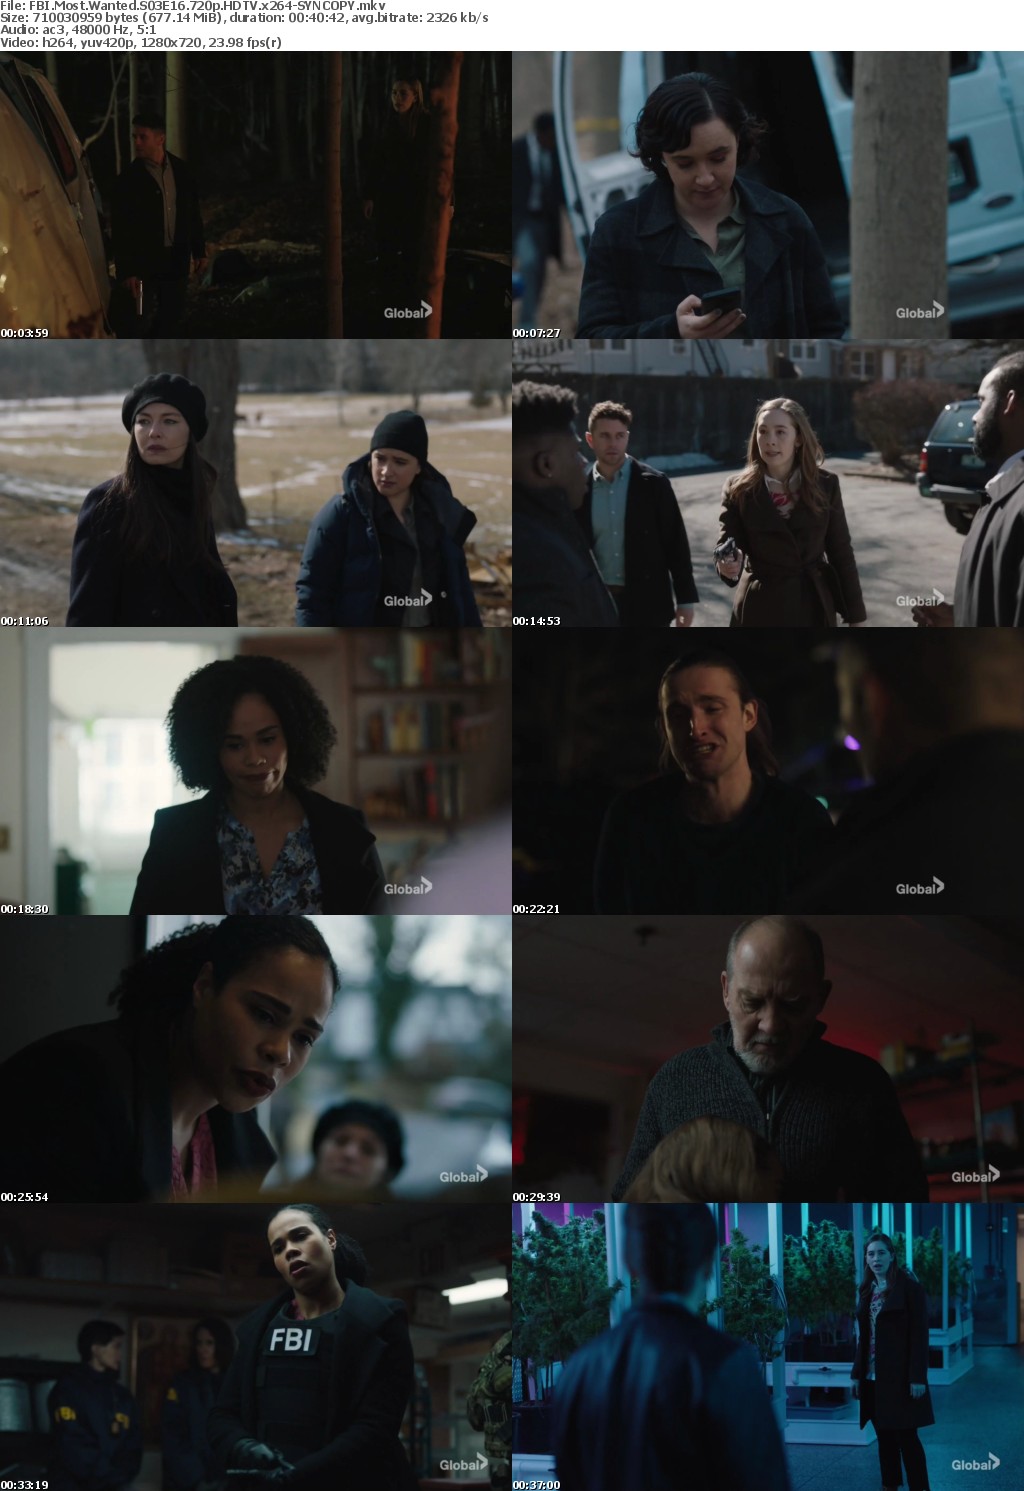 FBI Most Wanted S03E16 720p HDTV x264-SYNCOPY